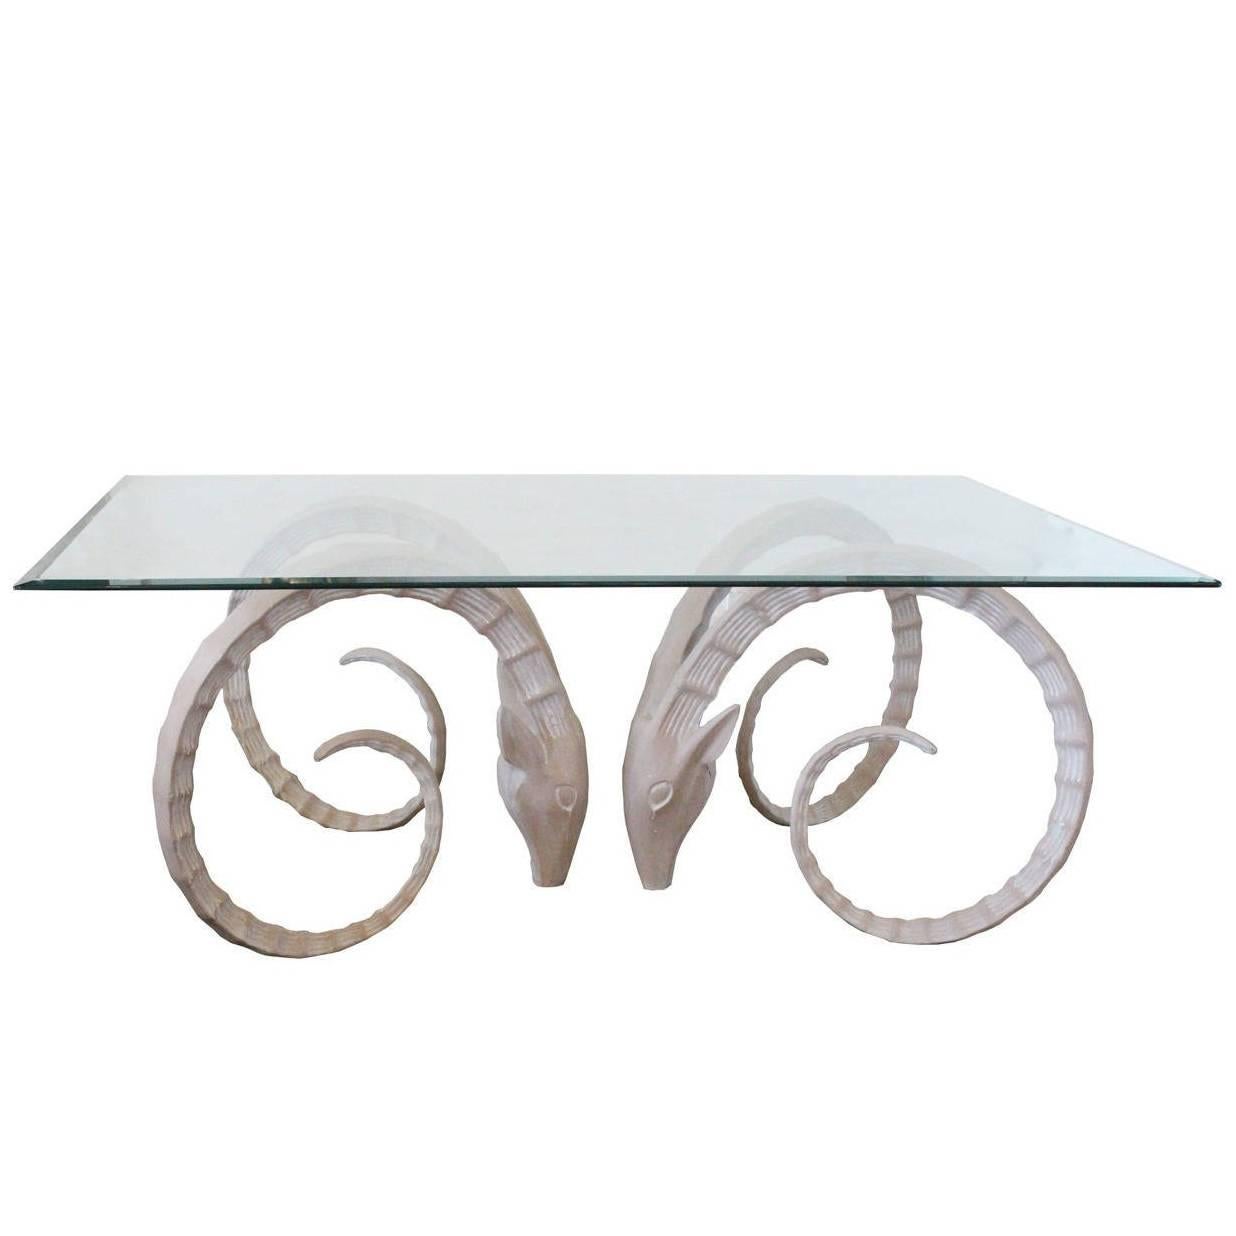 Sculptural Ibex Gazelle or Ram's Head Dining Table Bases For Sale